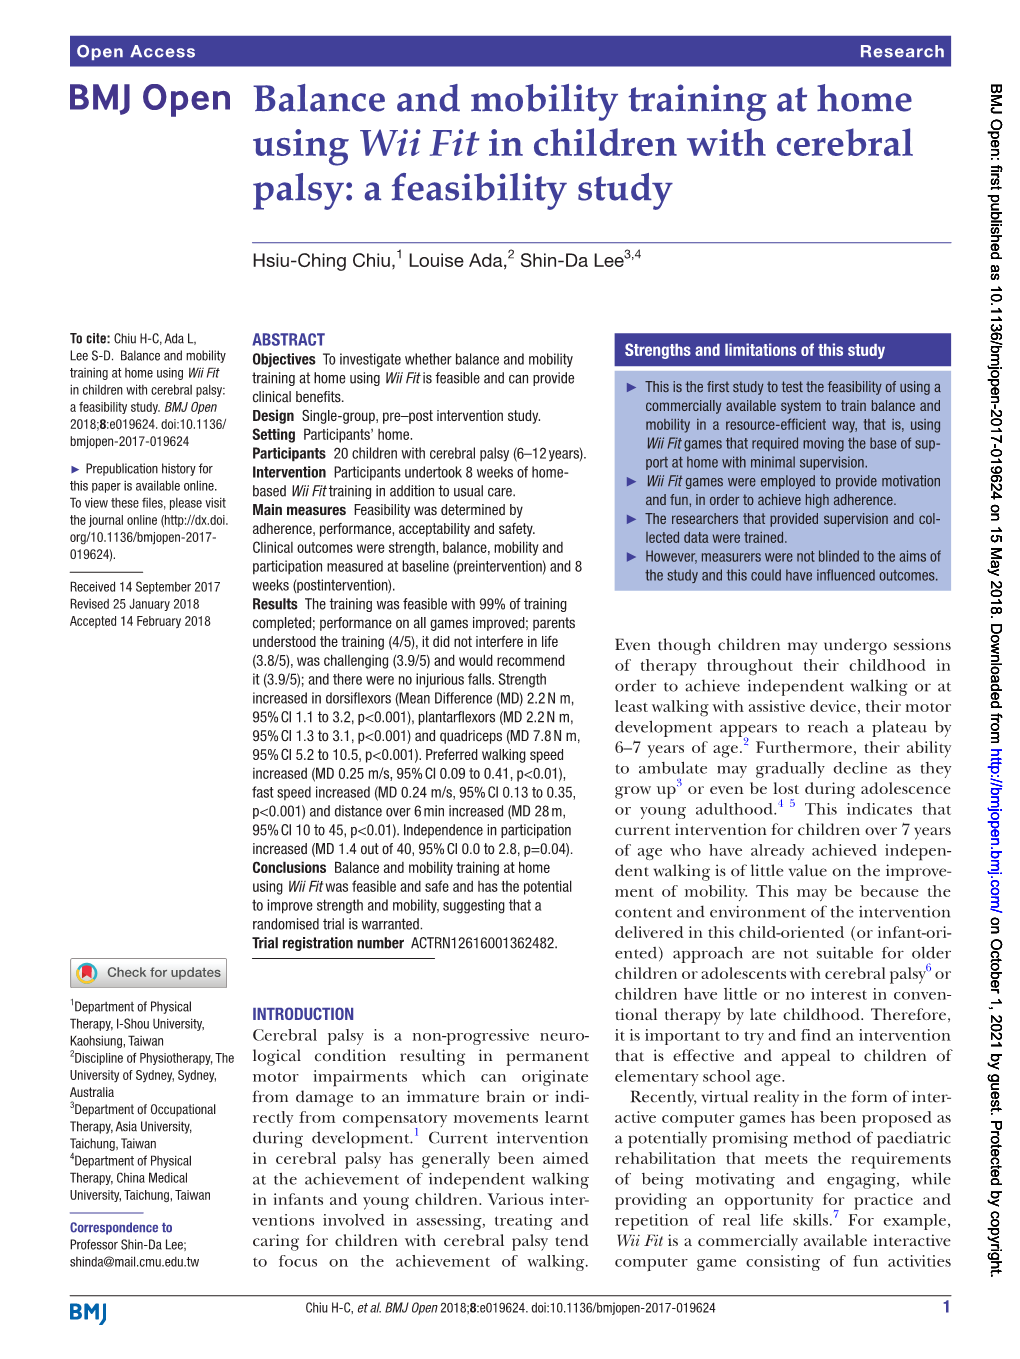 Balance and Mobility Training at Home Using Wii Fit in Children with Cerebral Palsy: a Feasibility Study